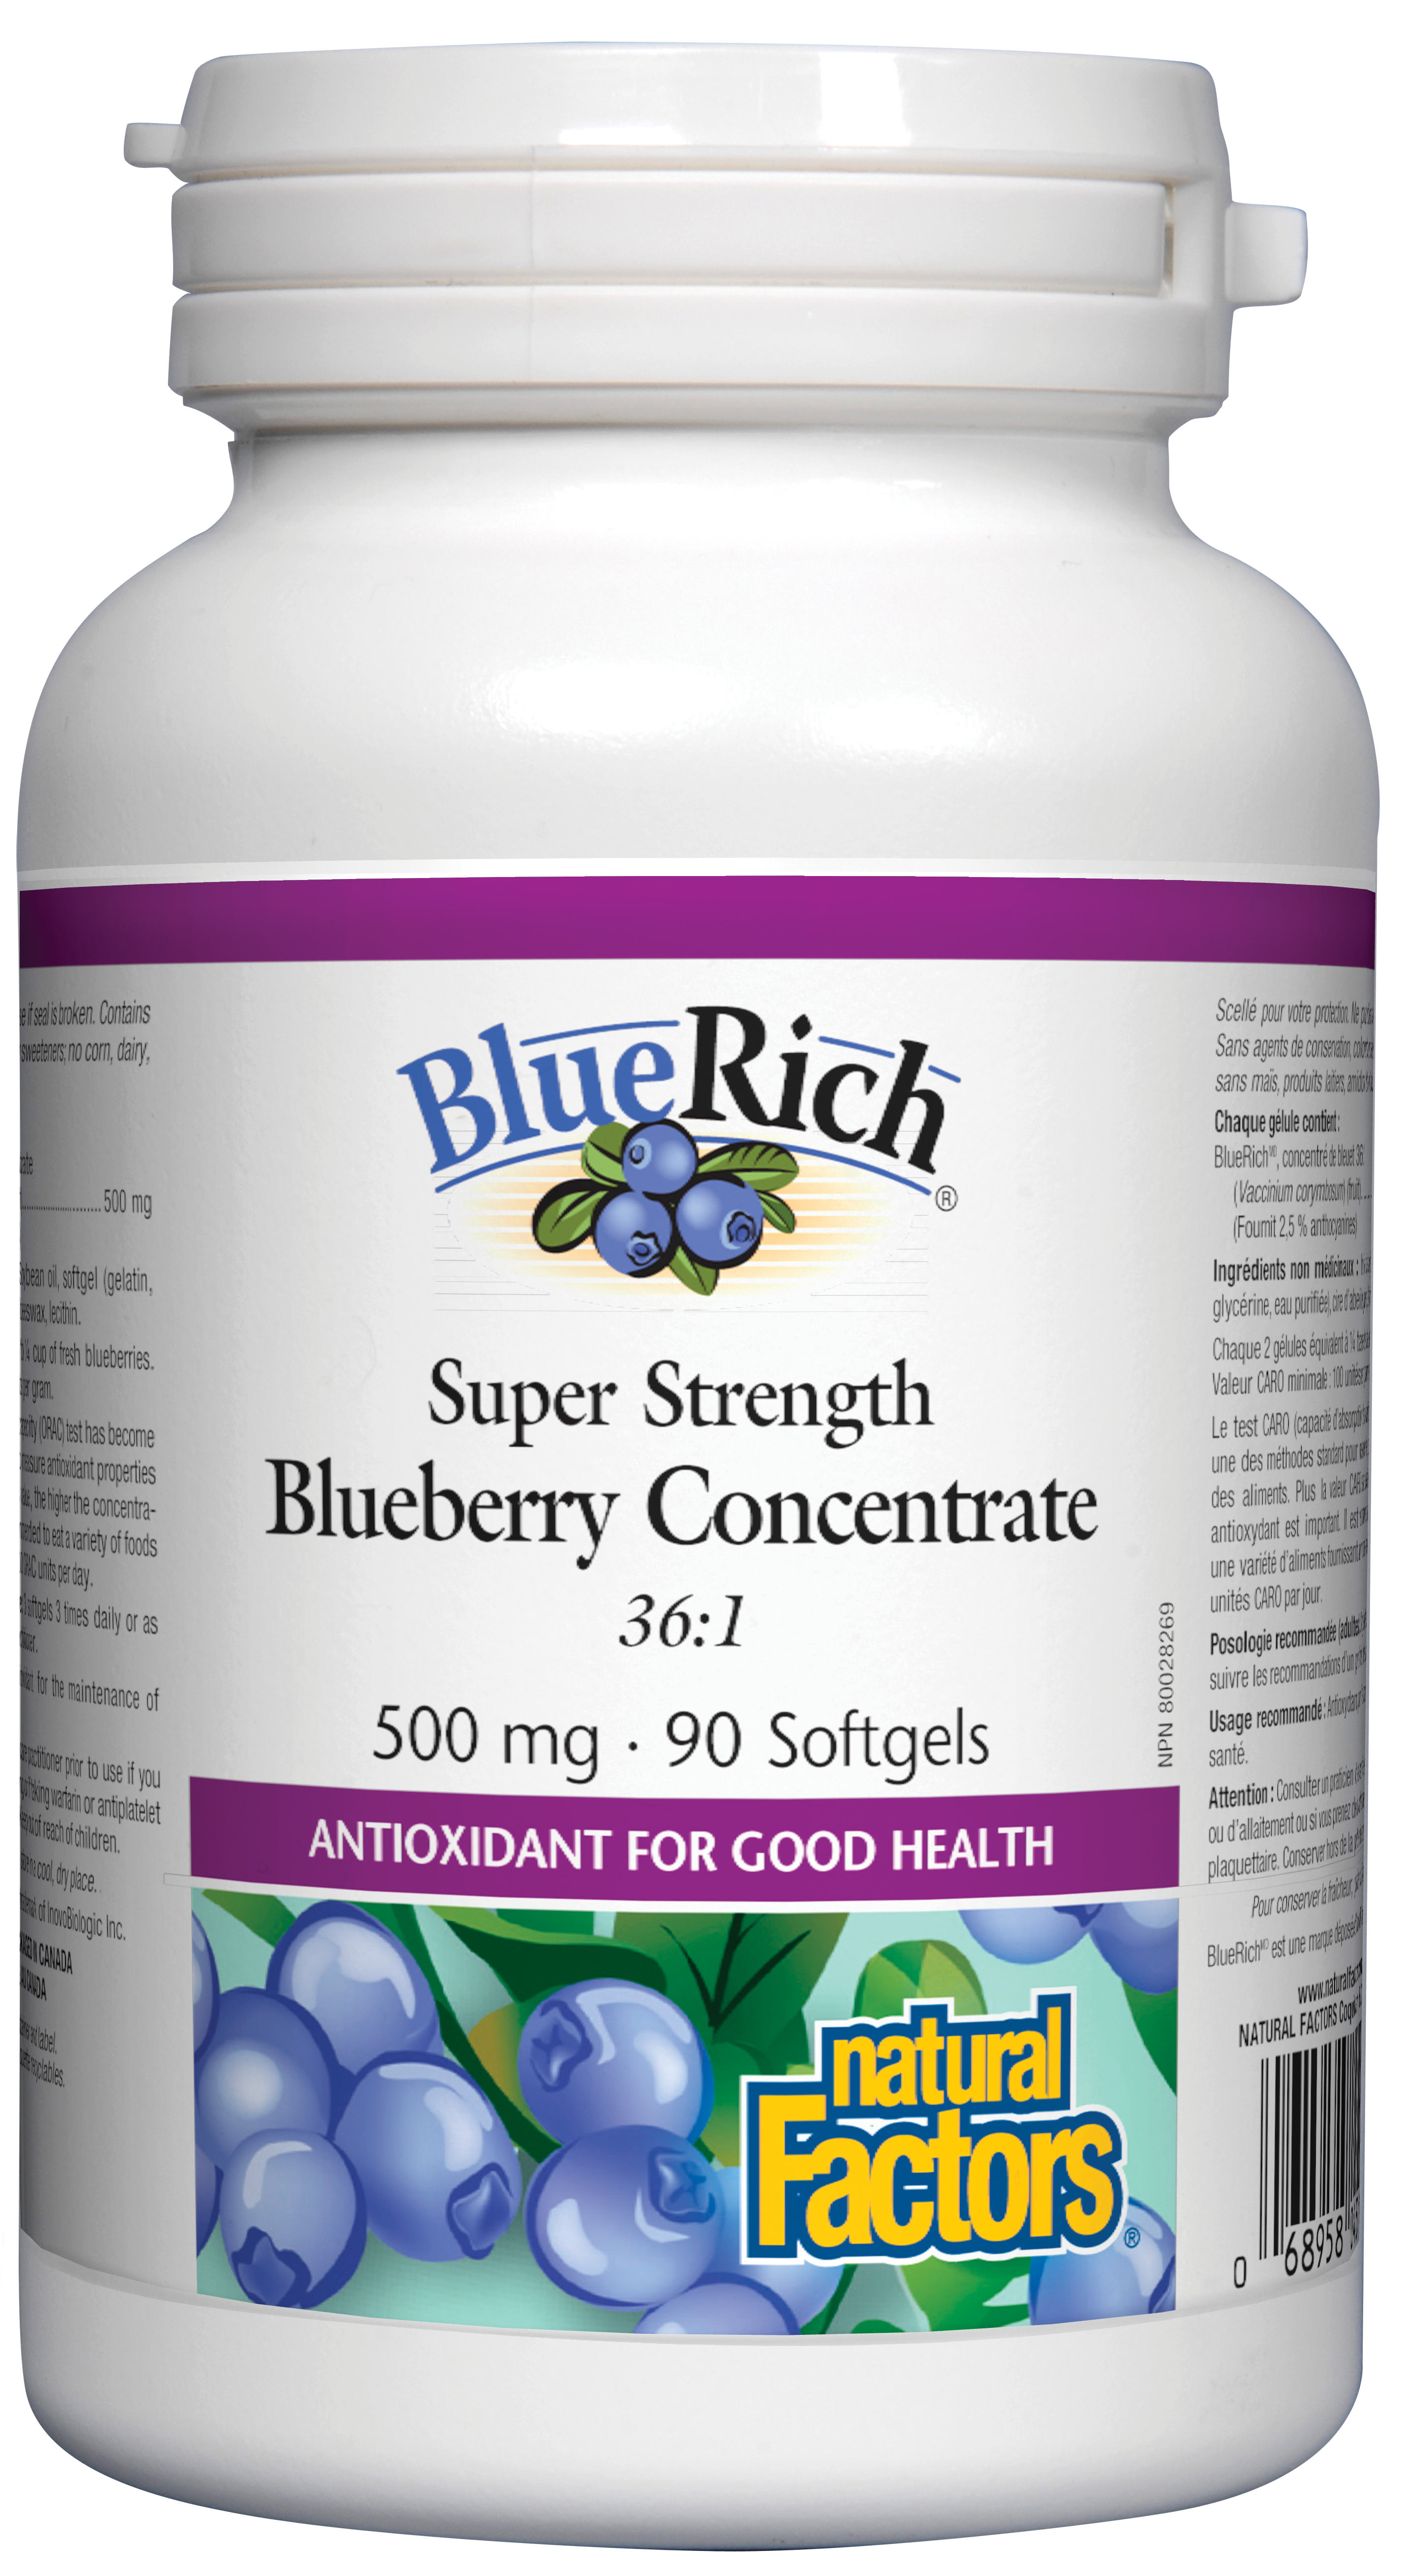 Natural Factors BlueRich Super Strength Blueberry Concentrate 36:1 500mg 90 Softgels